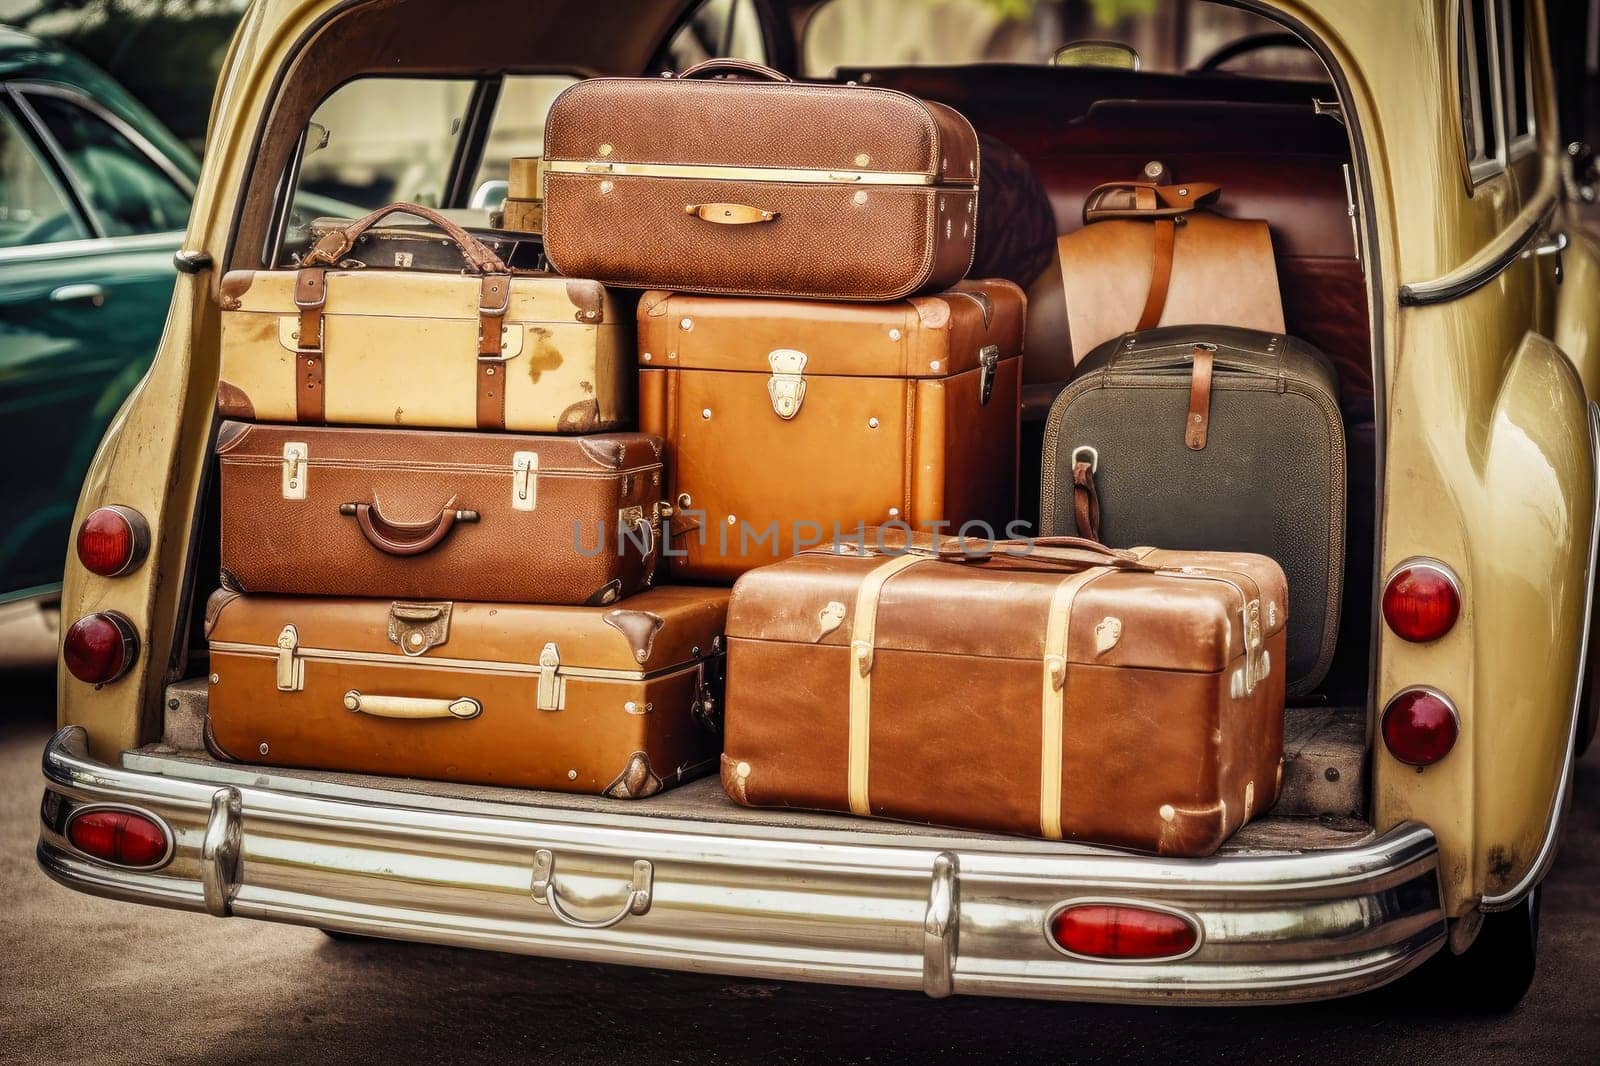 Retro car with luggage in trunk. Suitcases and bags in trunk of car ready to depart for holidays. Travel, vacation concept